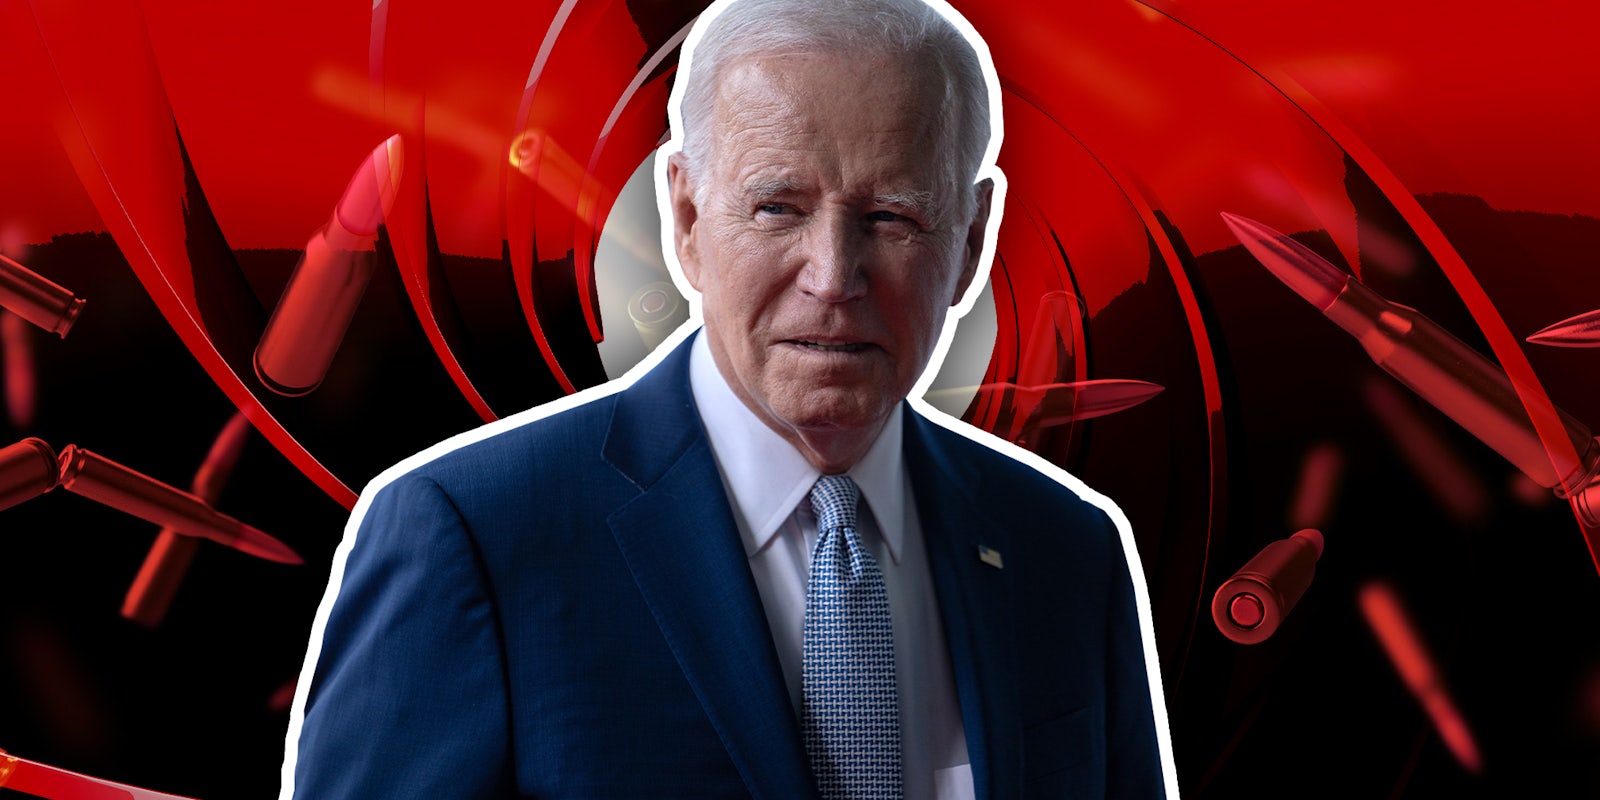 Biden supporters mock Trump supporters' claim DOJ wanted to assassinate ex-president during Mar-a-Lago raid